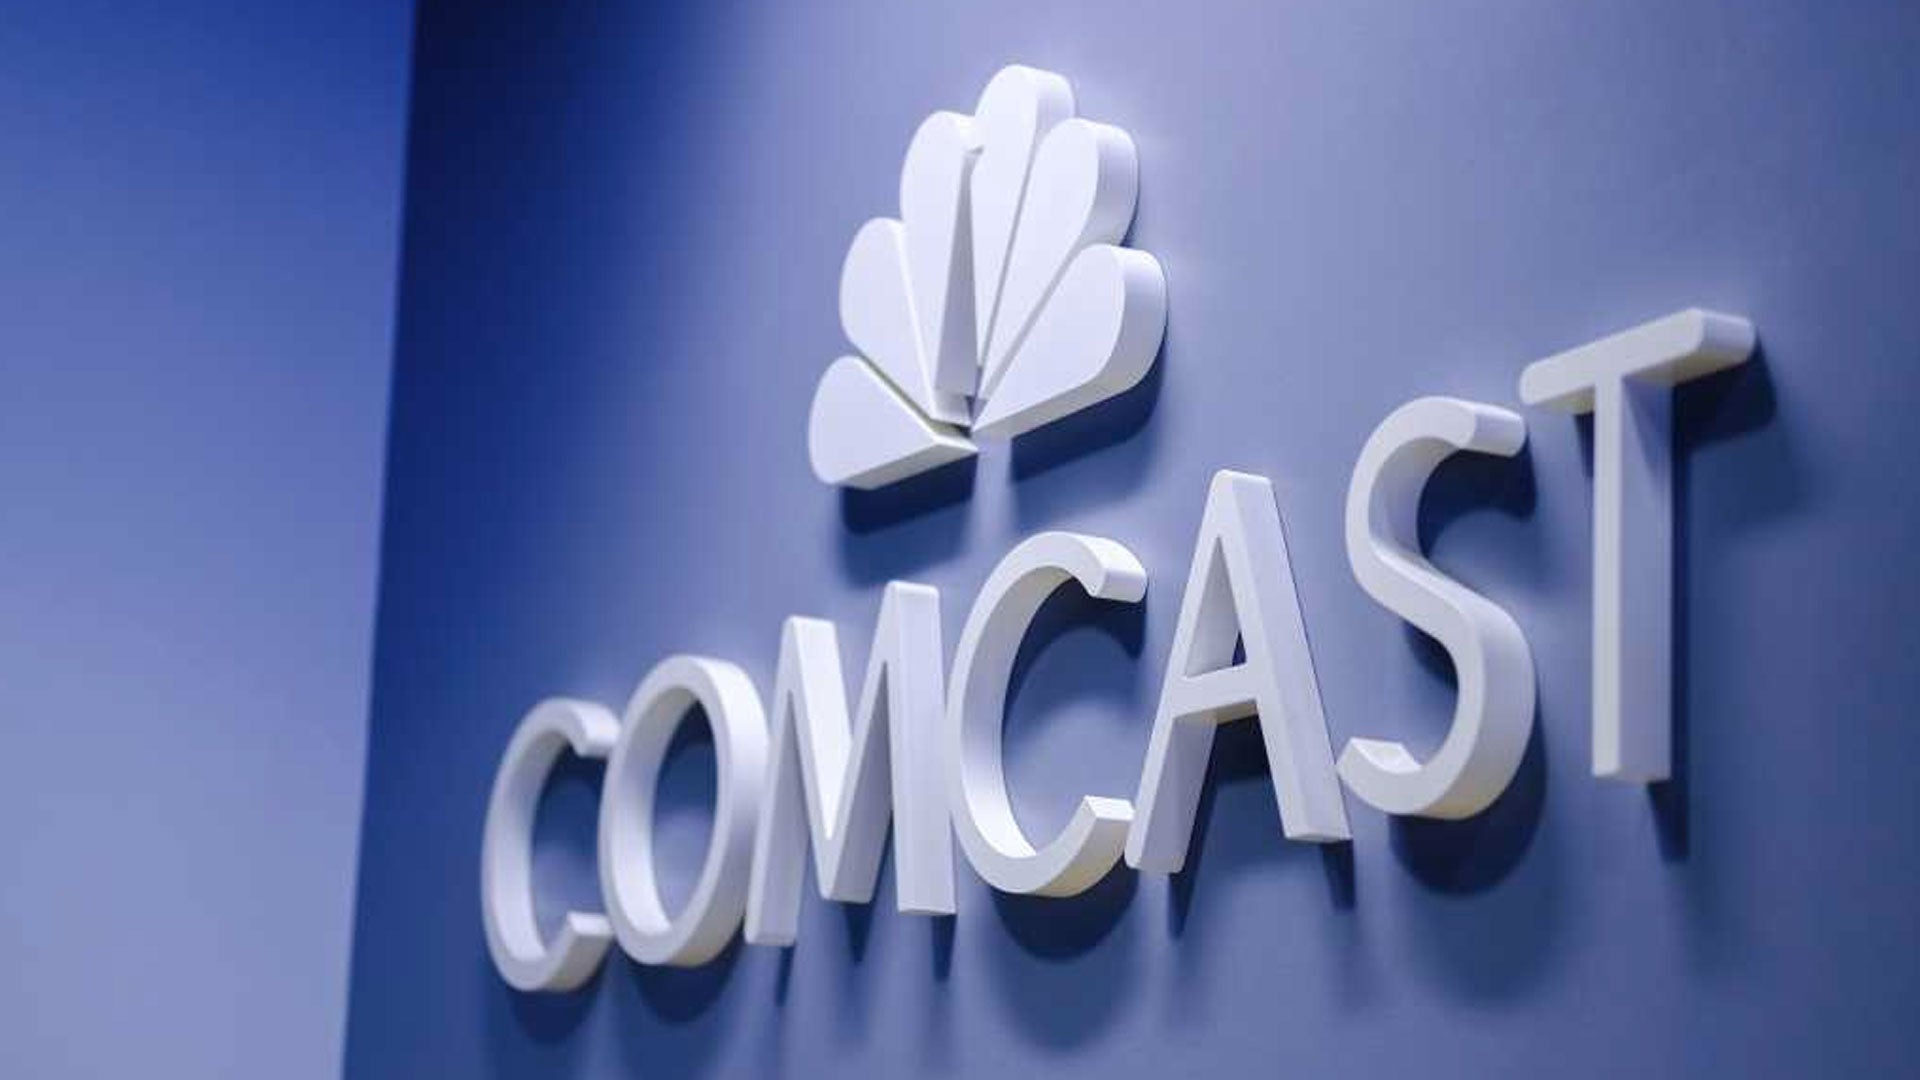 Major Victory for Human Dignity': Comcast Cuts Ties with World's Largest  Pornography Site | CBN News